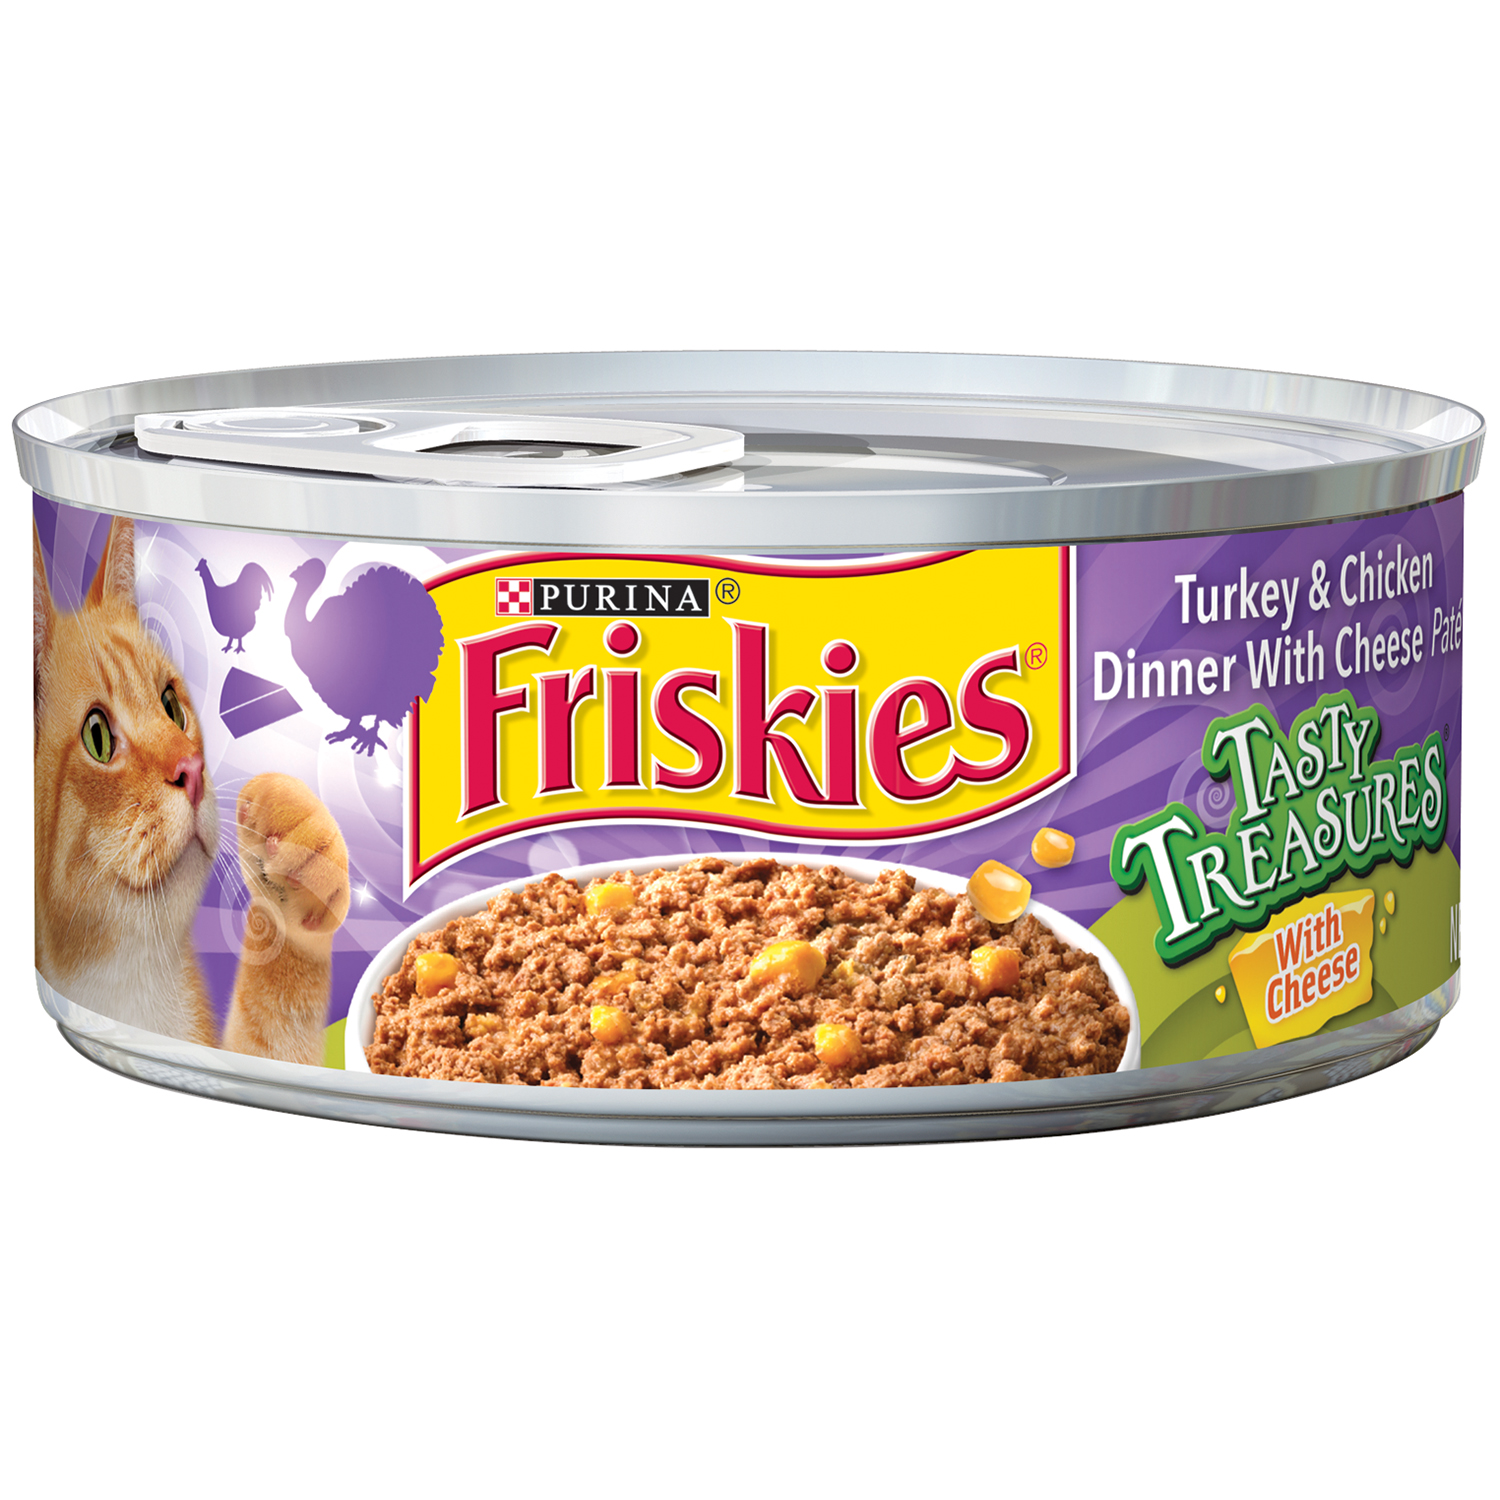 Friskies Tasty Treasures Pate Turkey & Chicken Dinner with Cheese 5.5 oz. Can